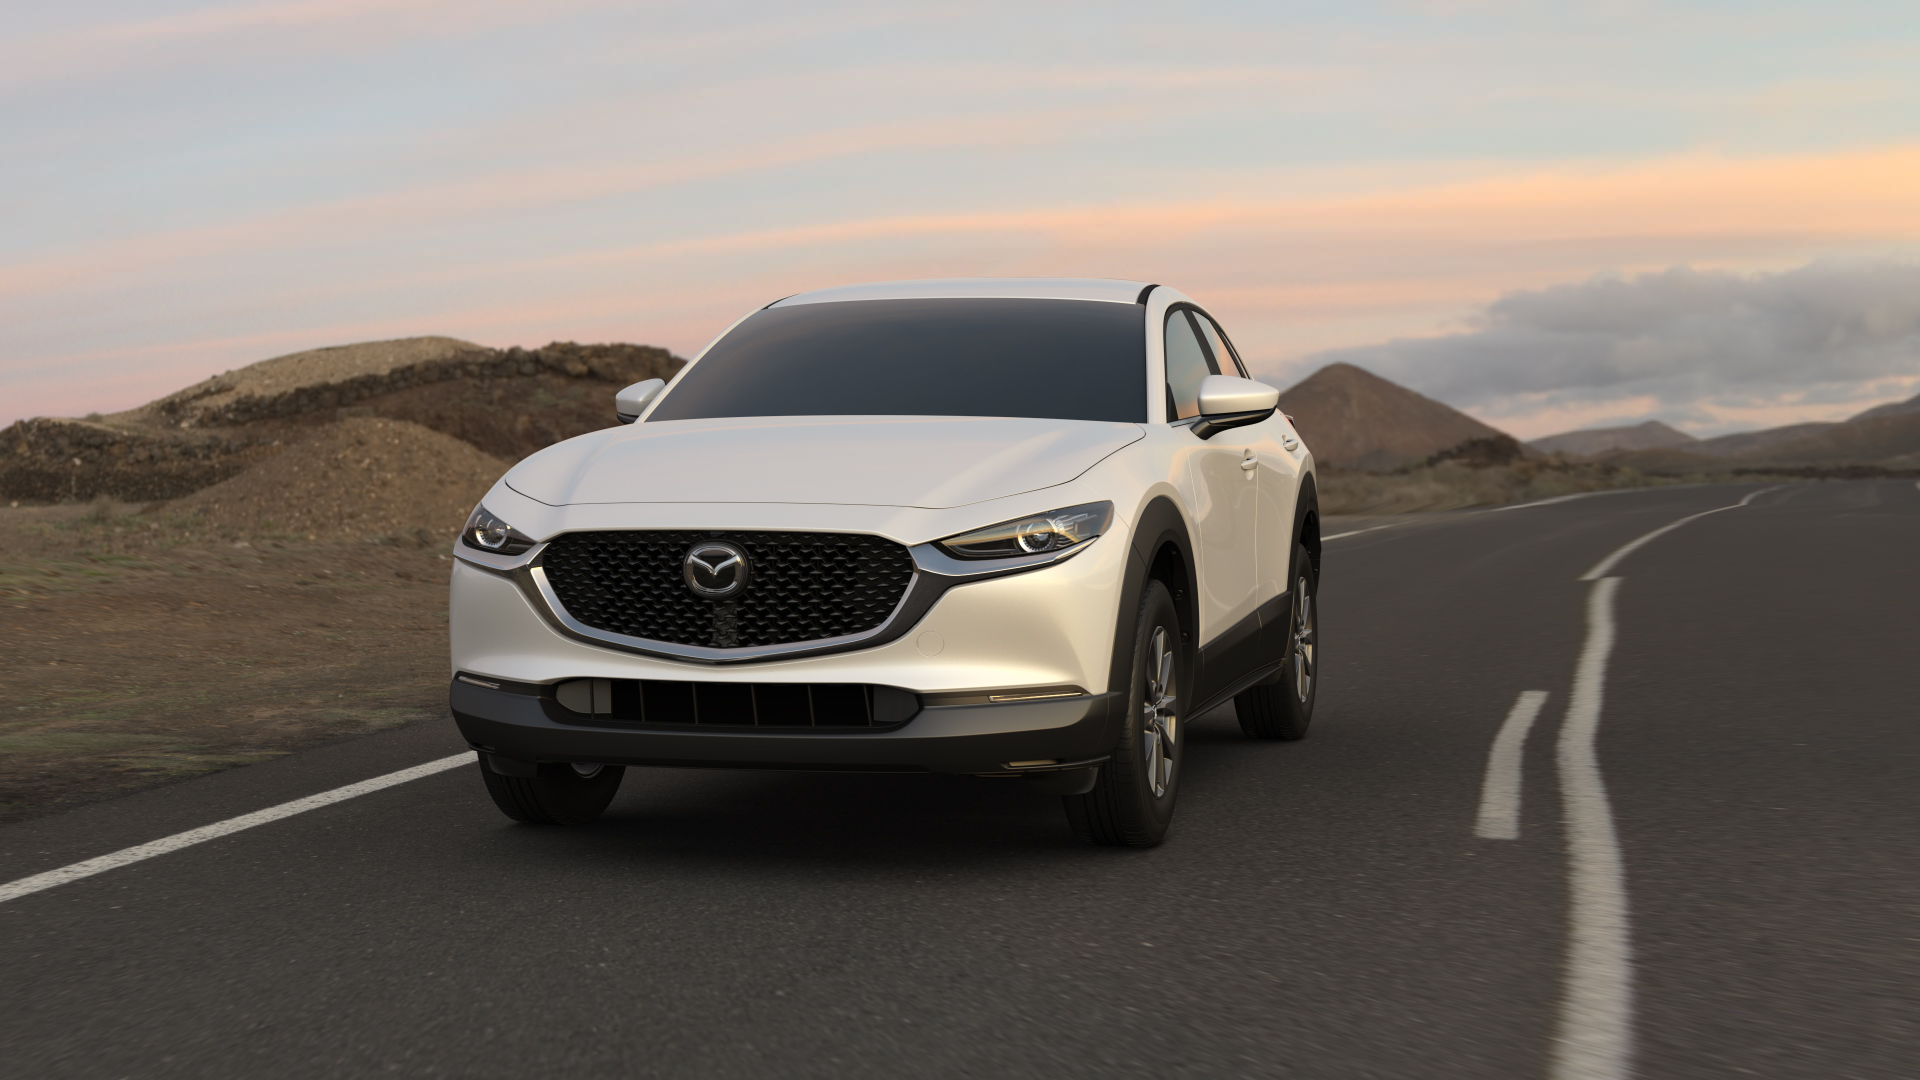 The 2021 Mazda CX-30 on the road